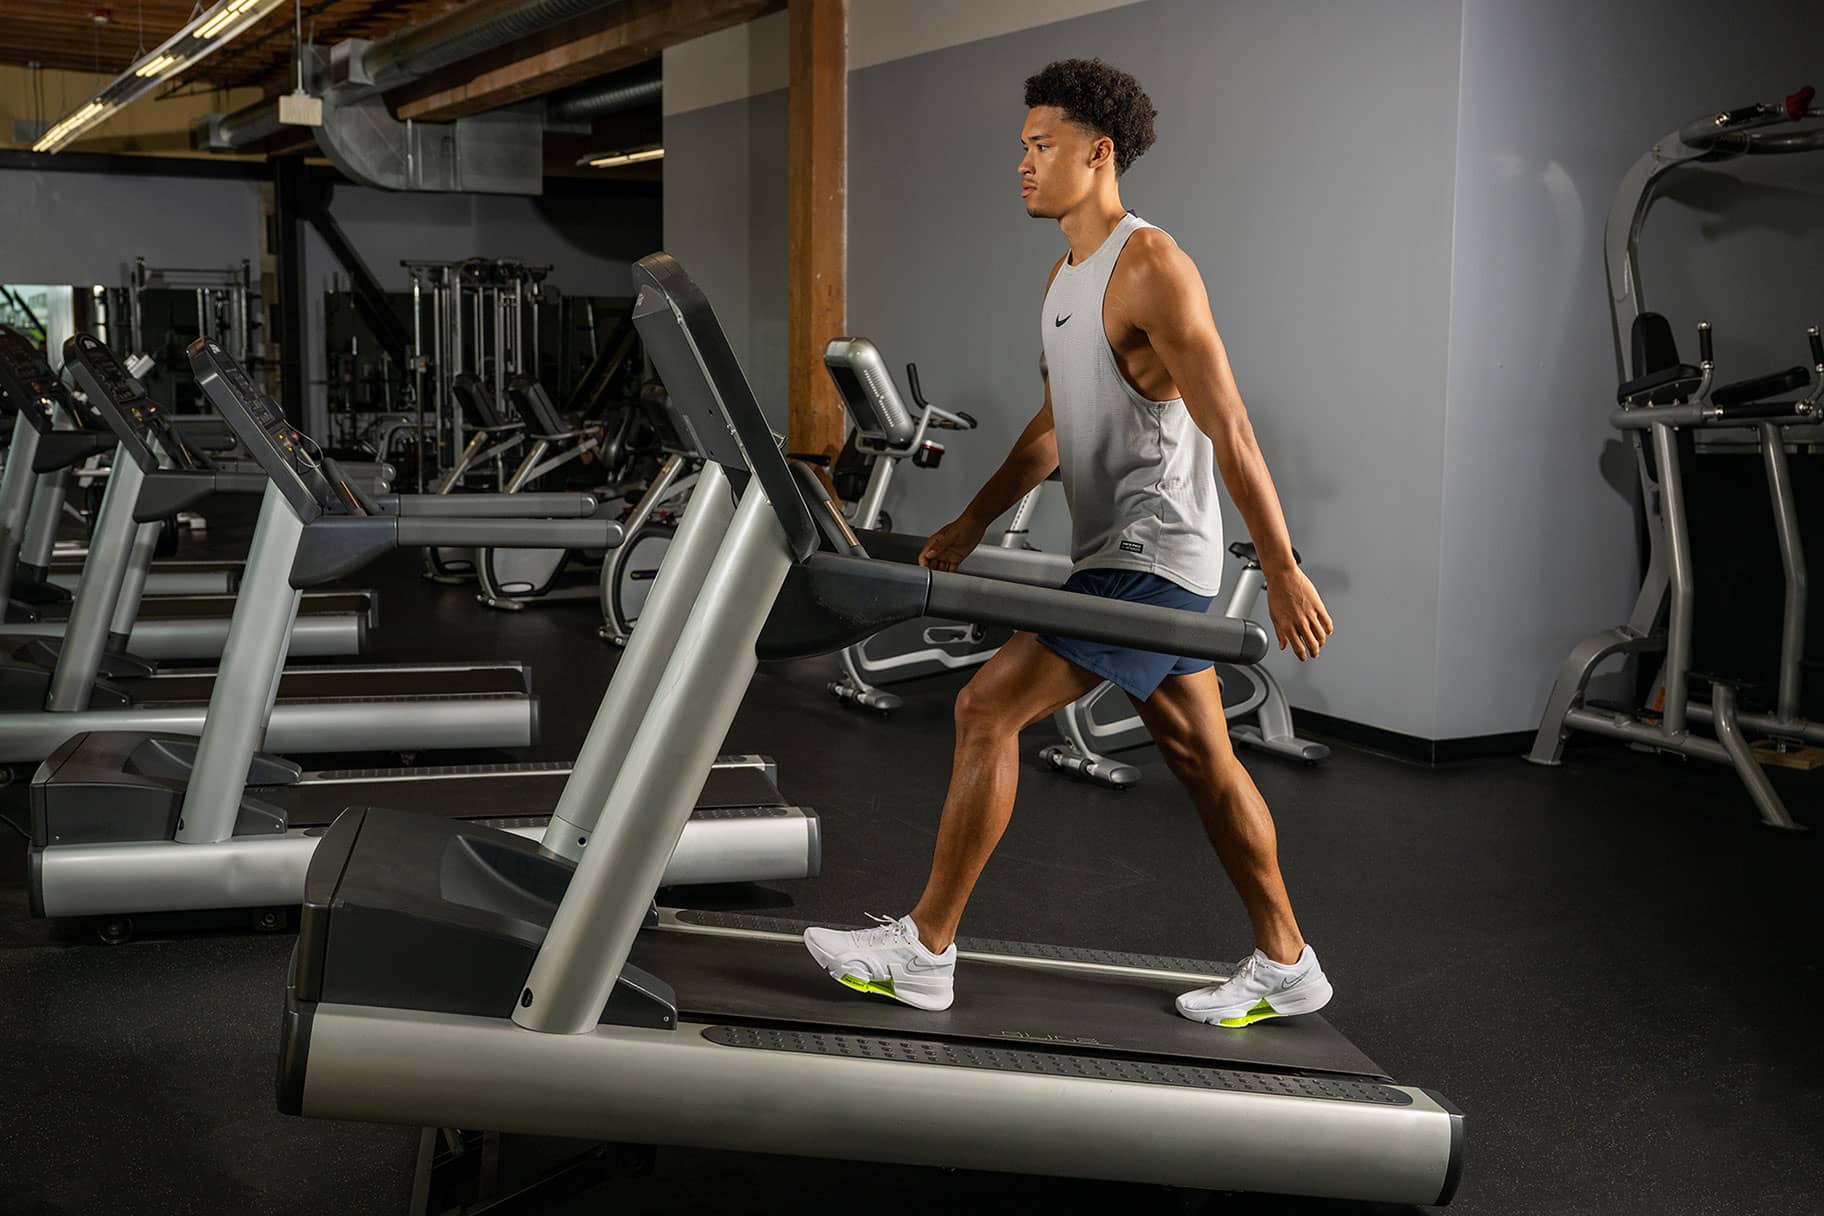 
Does Walking On A Treadmill Make Your Legs Skinnier? Here Is What You Need To Know